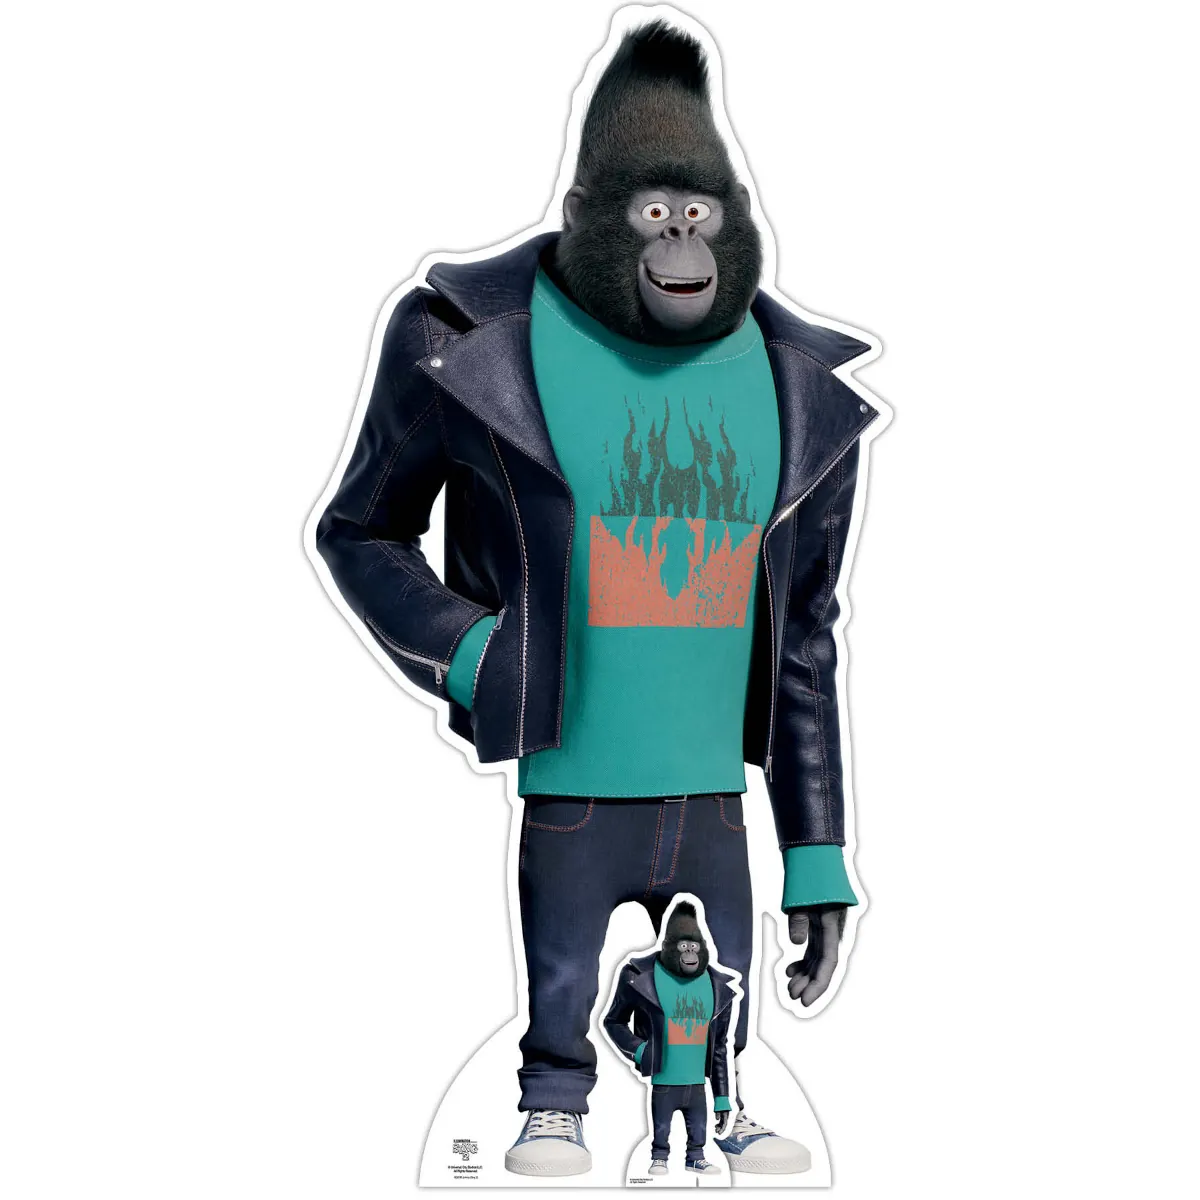 SC4085 Johnny Mountain Gorilla (Sing 2) Official Lifesize + Mini Cardboard Cutout Standee Front